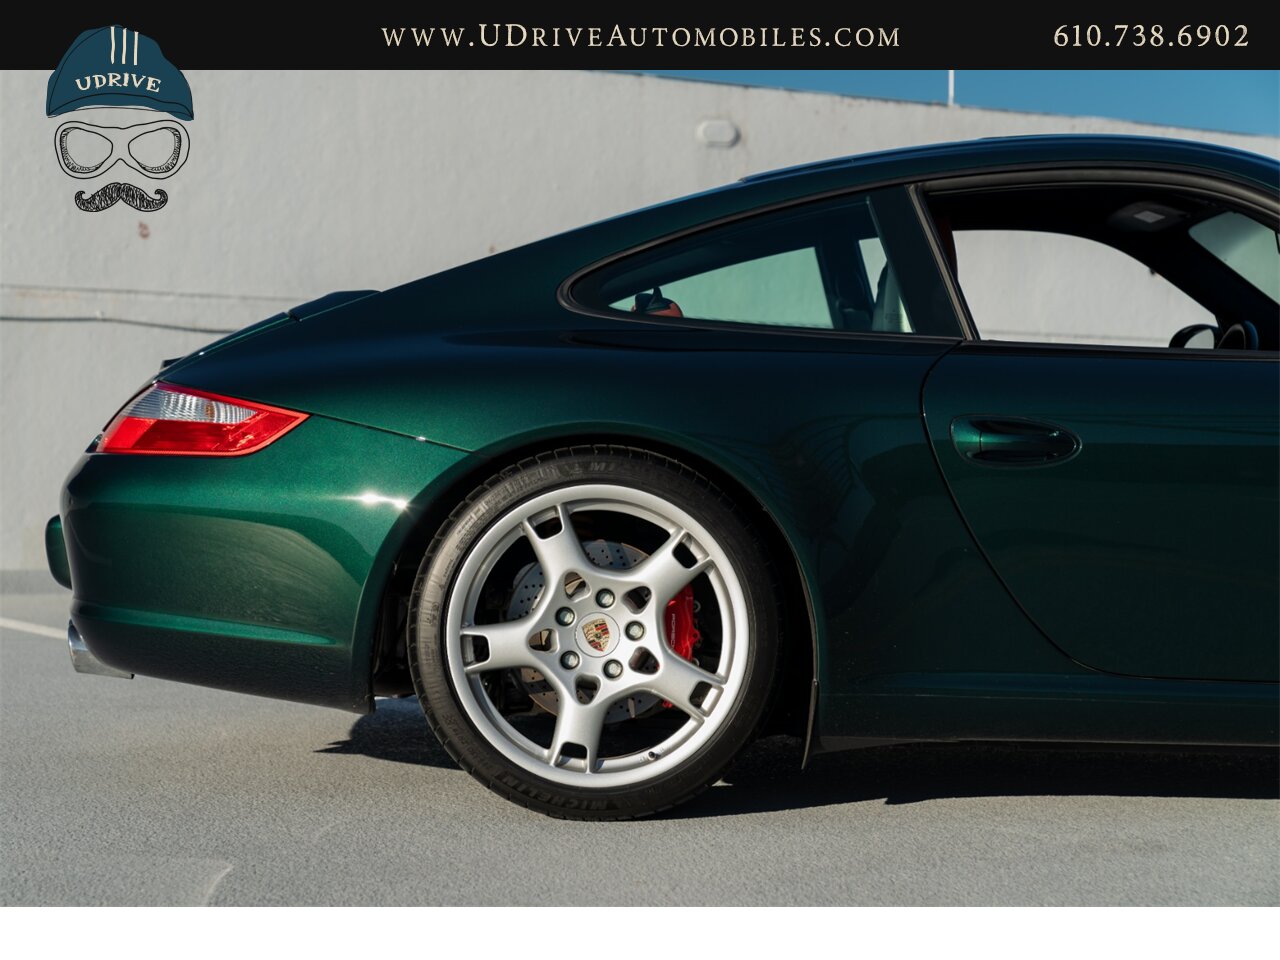 2007 Porsche 911 Carrera S 6Spd 997S RARE X51 Power Kit 381hp  1 of a Kind Forest Green over Blk/Terracotta Chrono Adap Sport Sts $113k MSRP - Photo 17 - West Chester, PA 19382